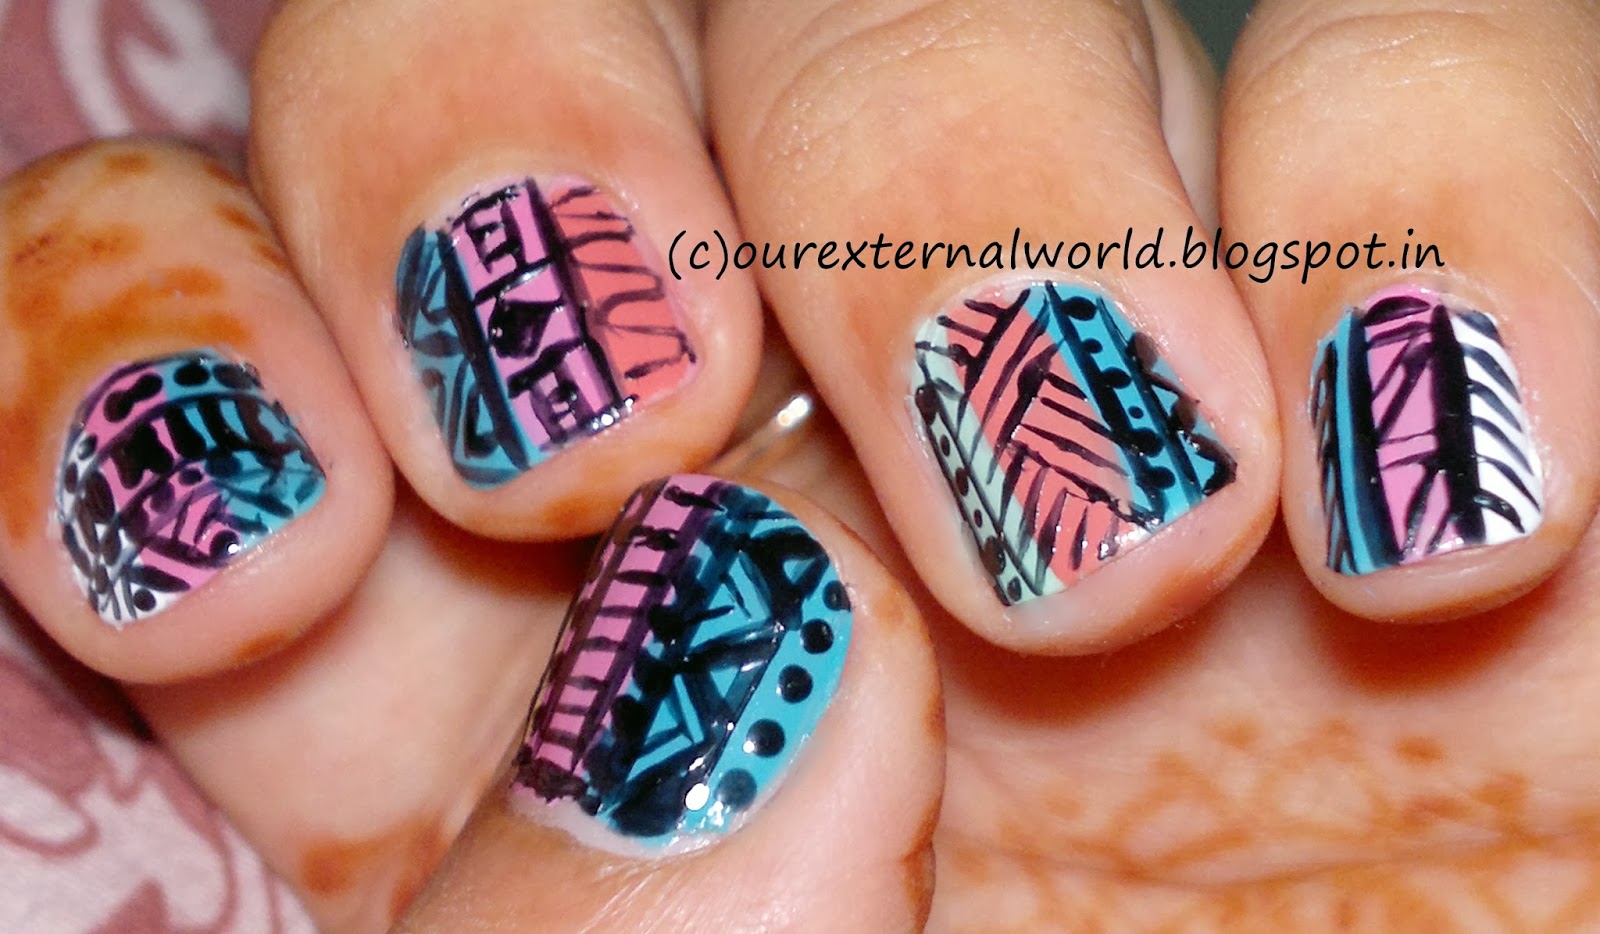 10. Tribal Nail Designs with Geometric Patterns on Pinterest - wide 8